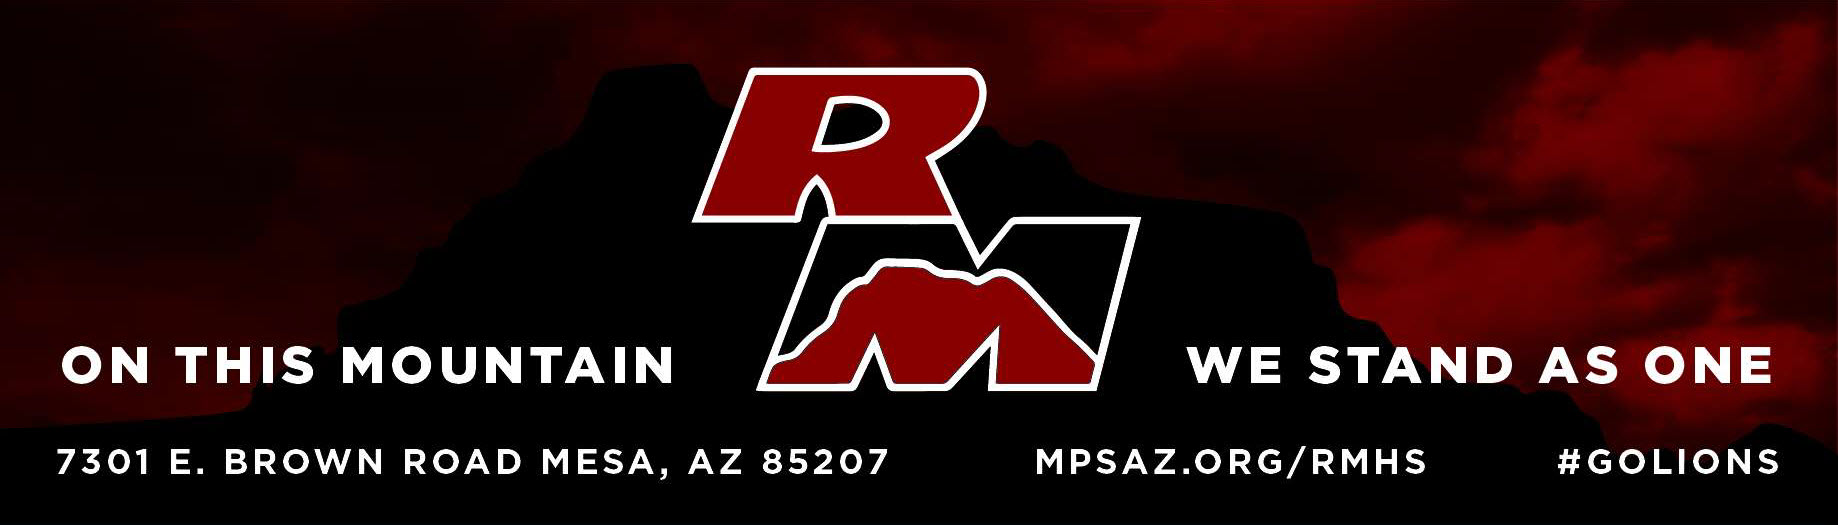 RM banner - on this mountain we stand as one 7301 e brown road mesa, az 85207, mpsaz.org/rmhs, #golions